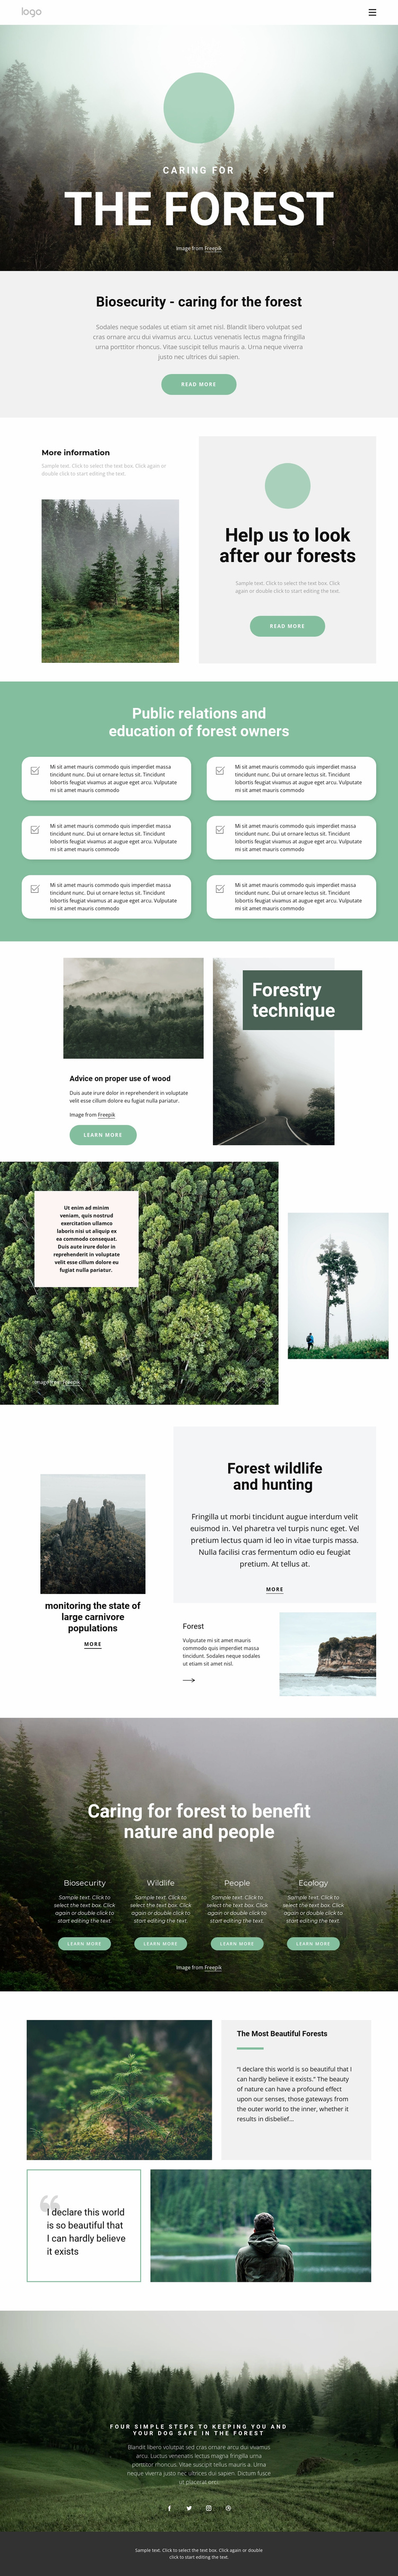 Caring for parks and forests Website Template